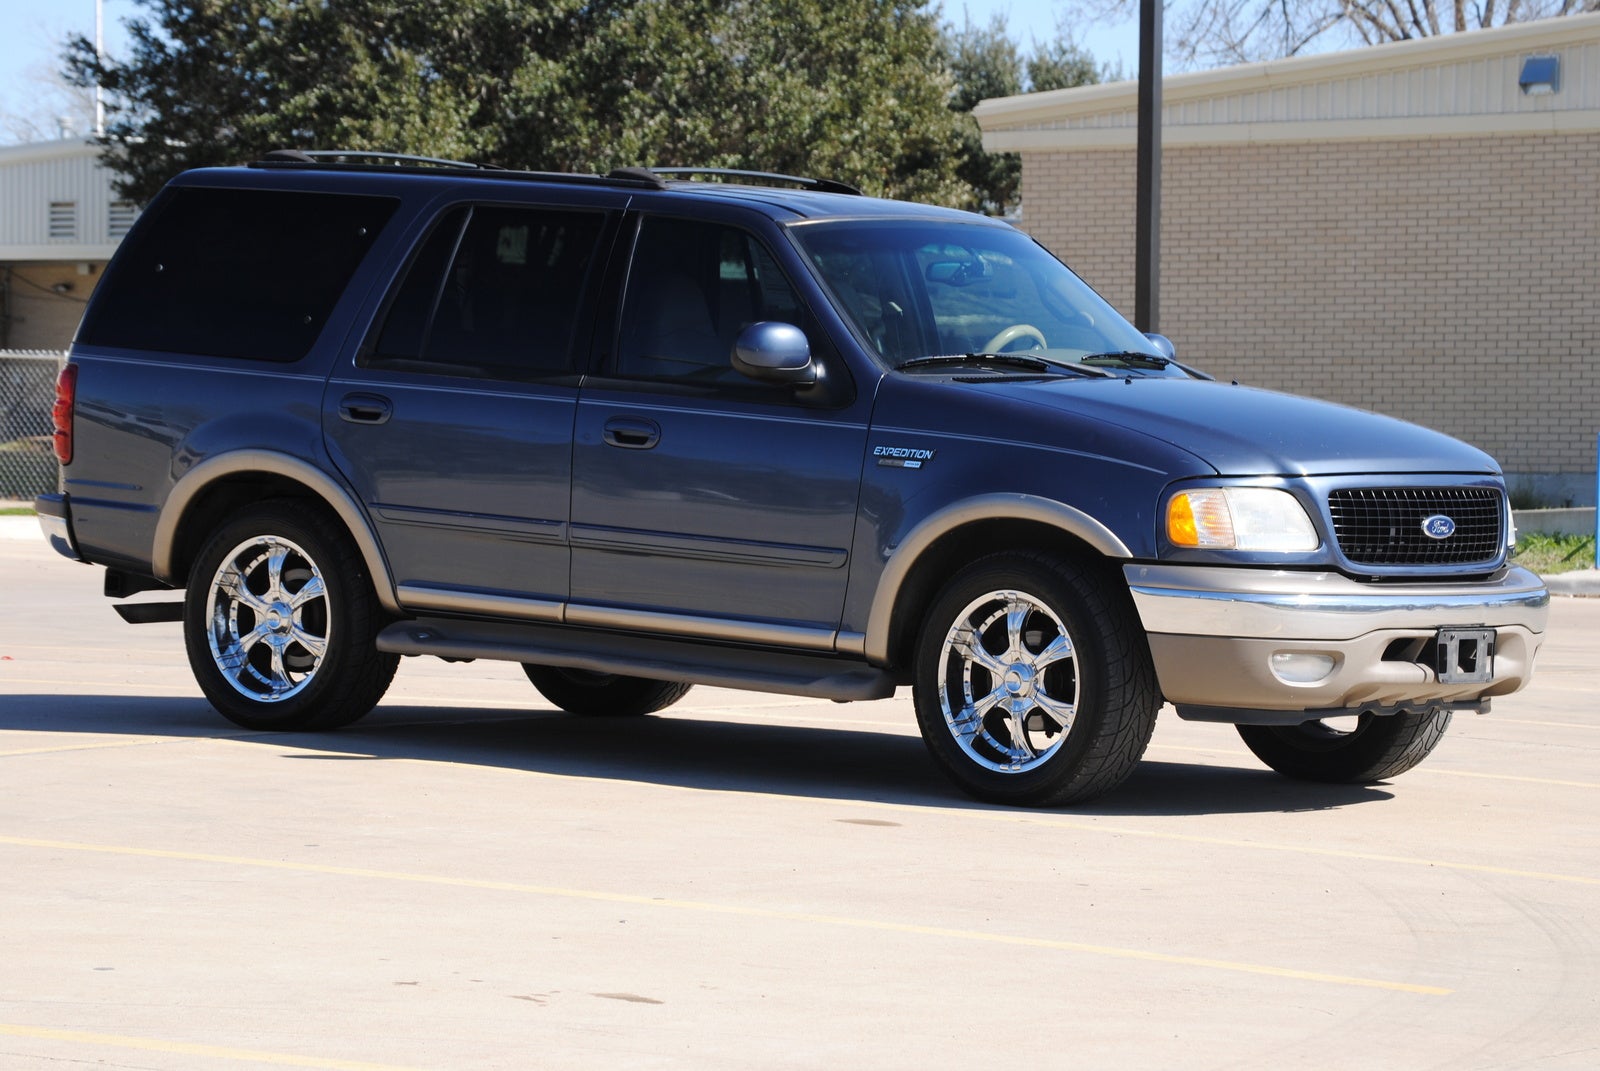 2002 Ford expedition edie bauer #1